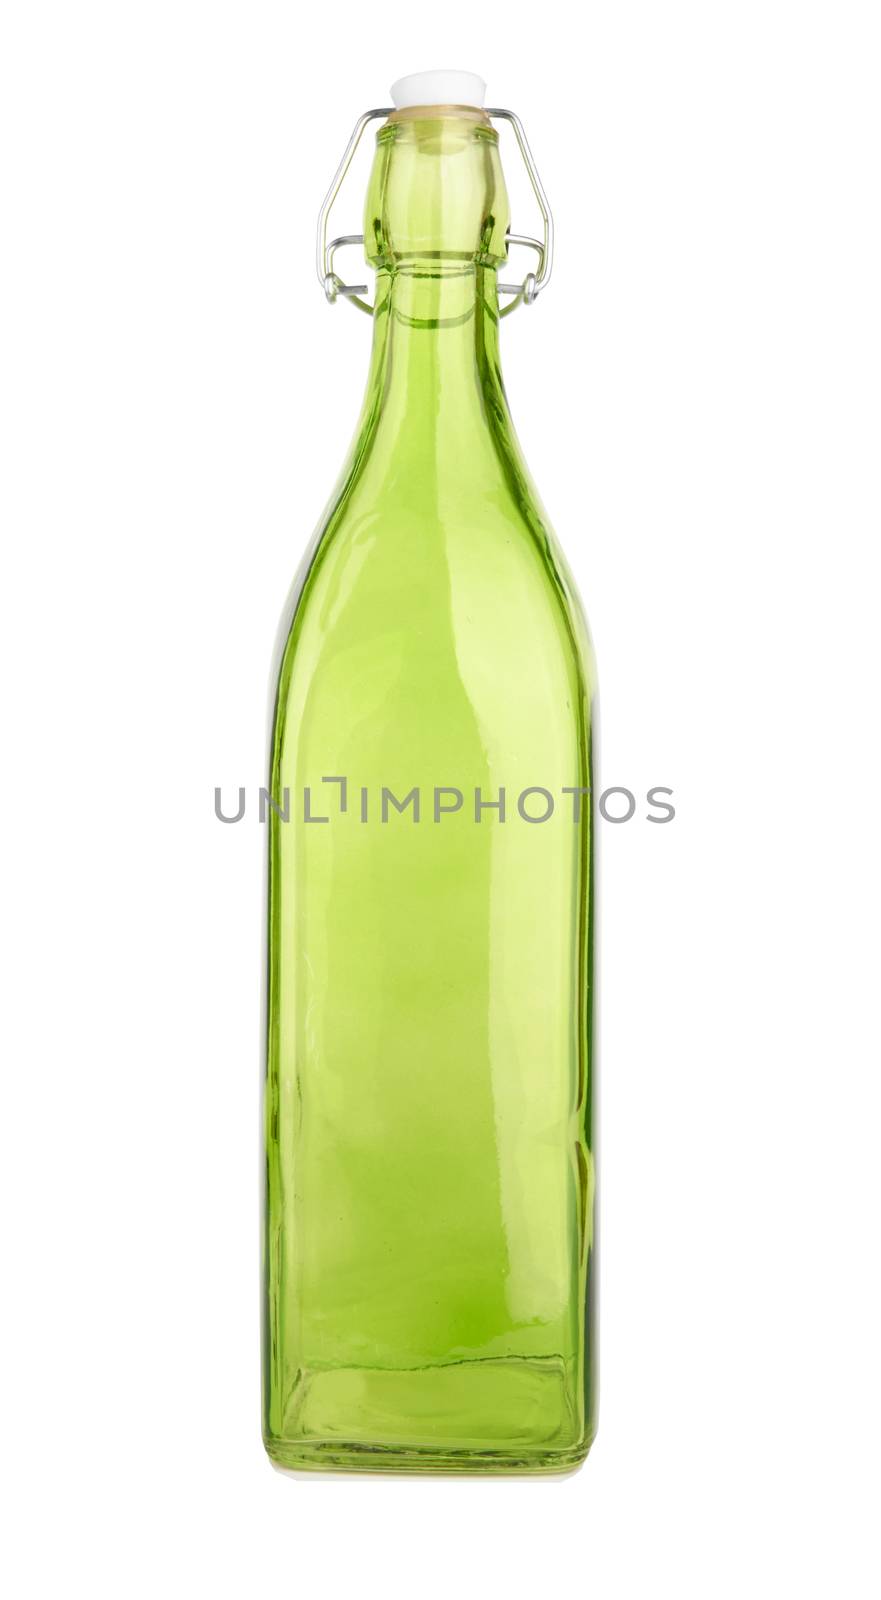 empty bottle with cap isolated on white background